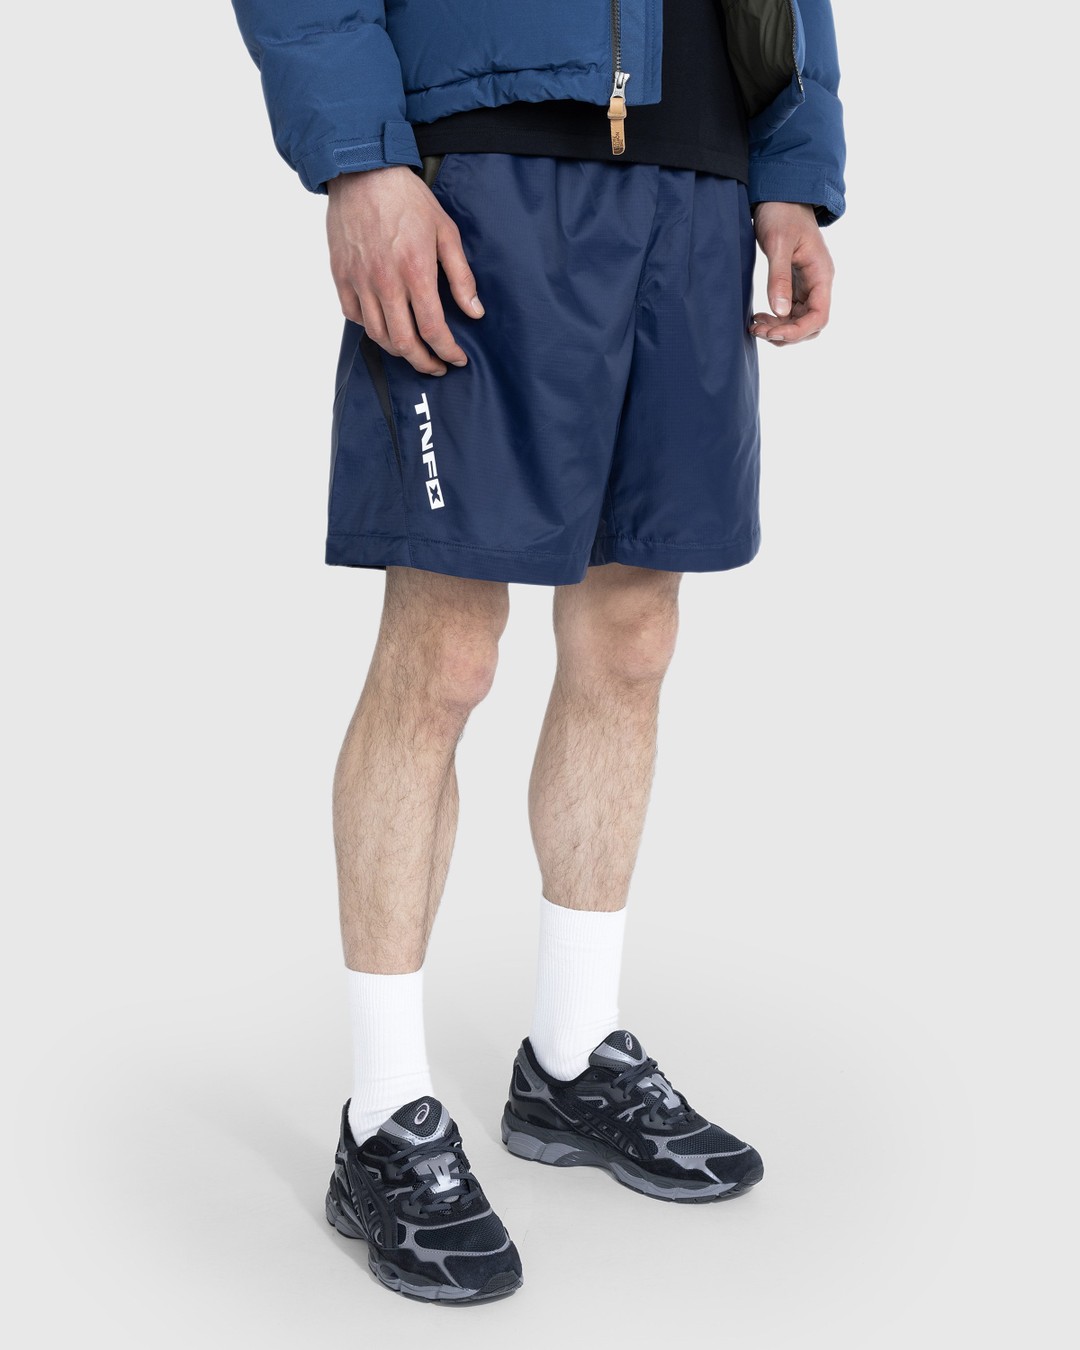 The North Face – TNF X Shorts Blue - Shorts - Blue - Image 2